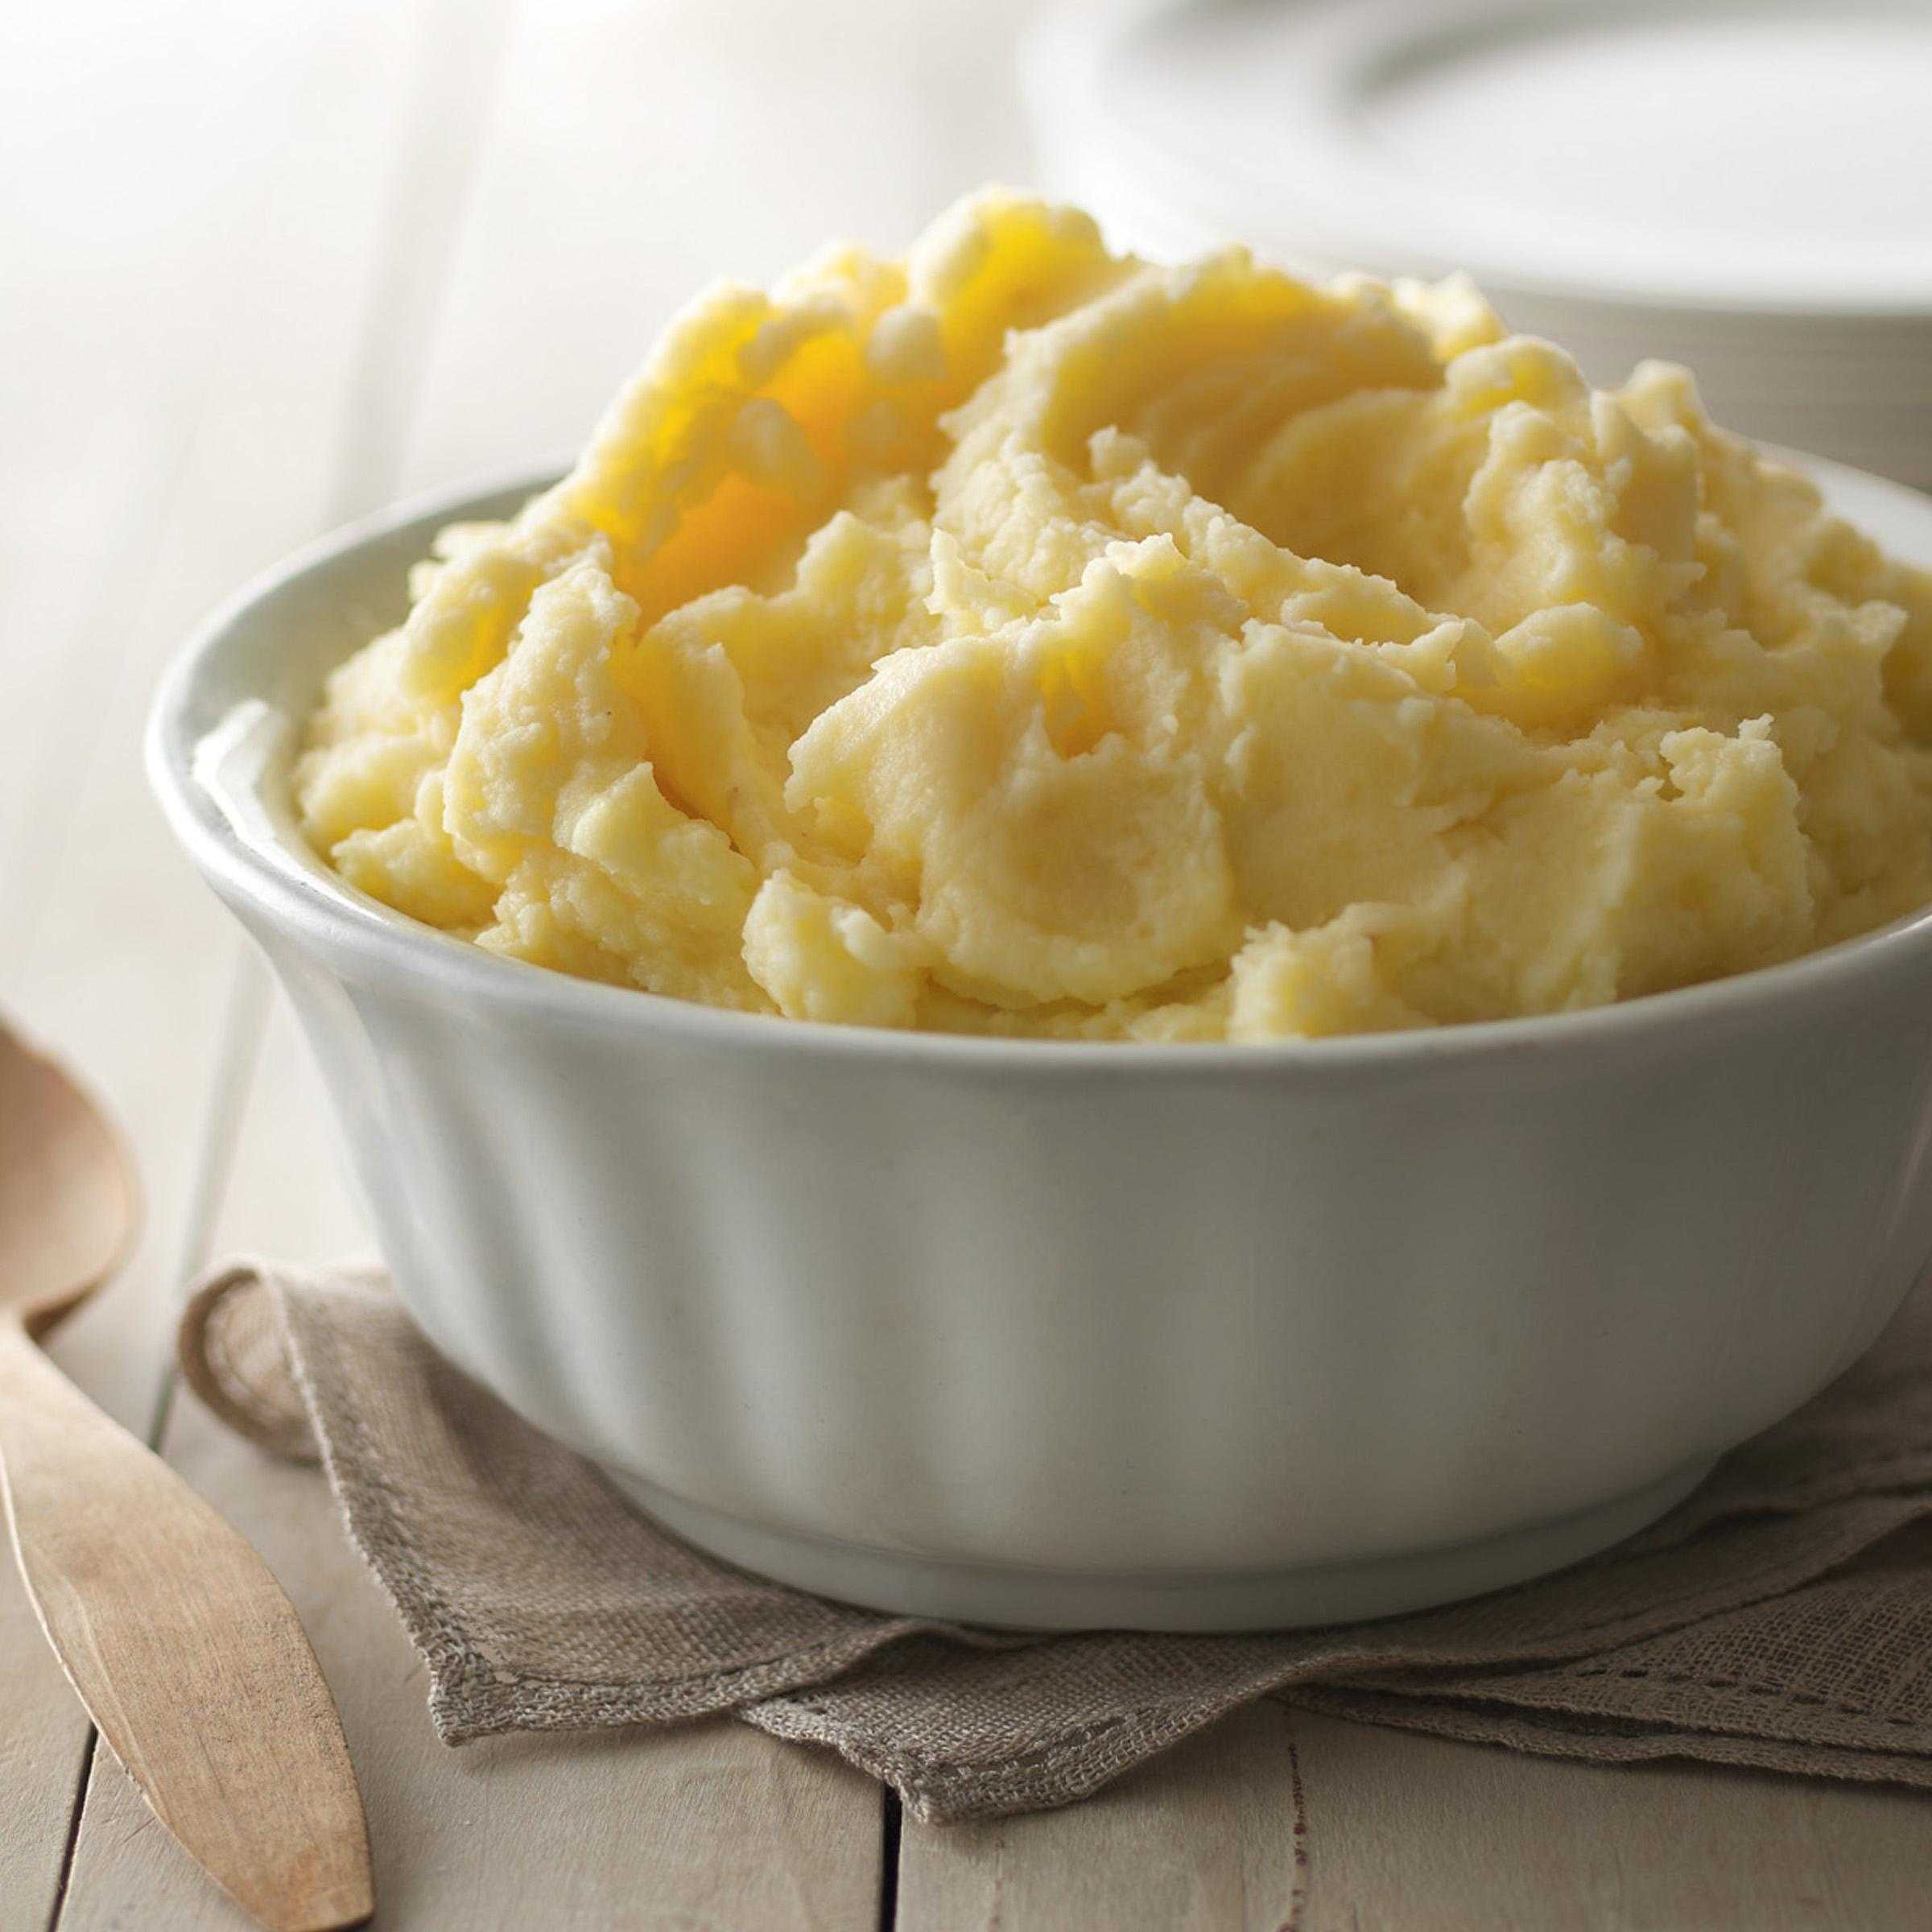 Simply Potatoes® Refrigerated Northern Gold® Mashed Potatoes made with peeled Yellow potatoes, 4/6 Lb Bags